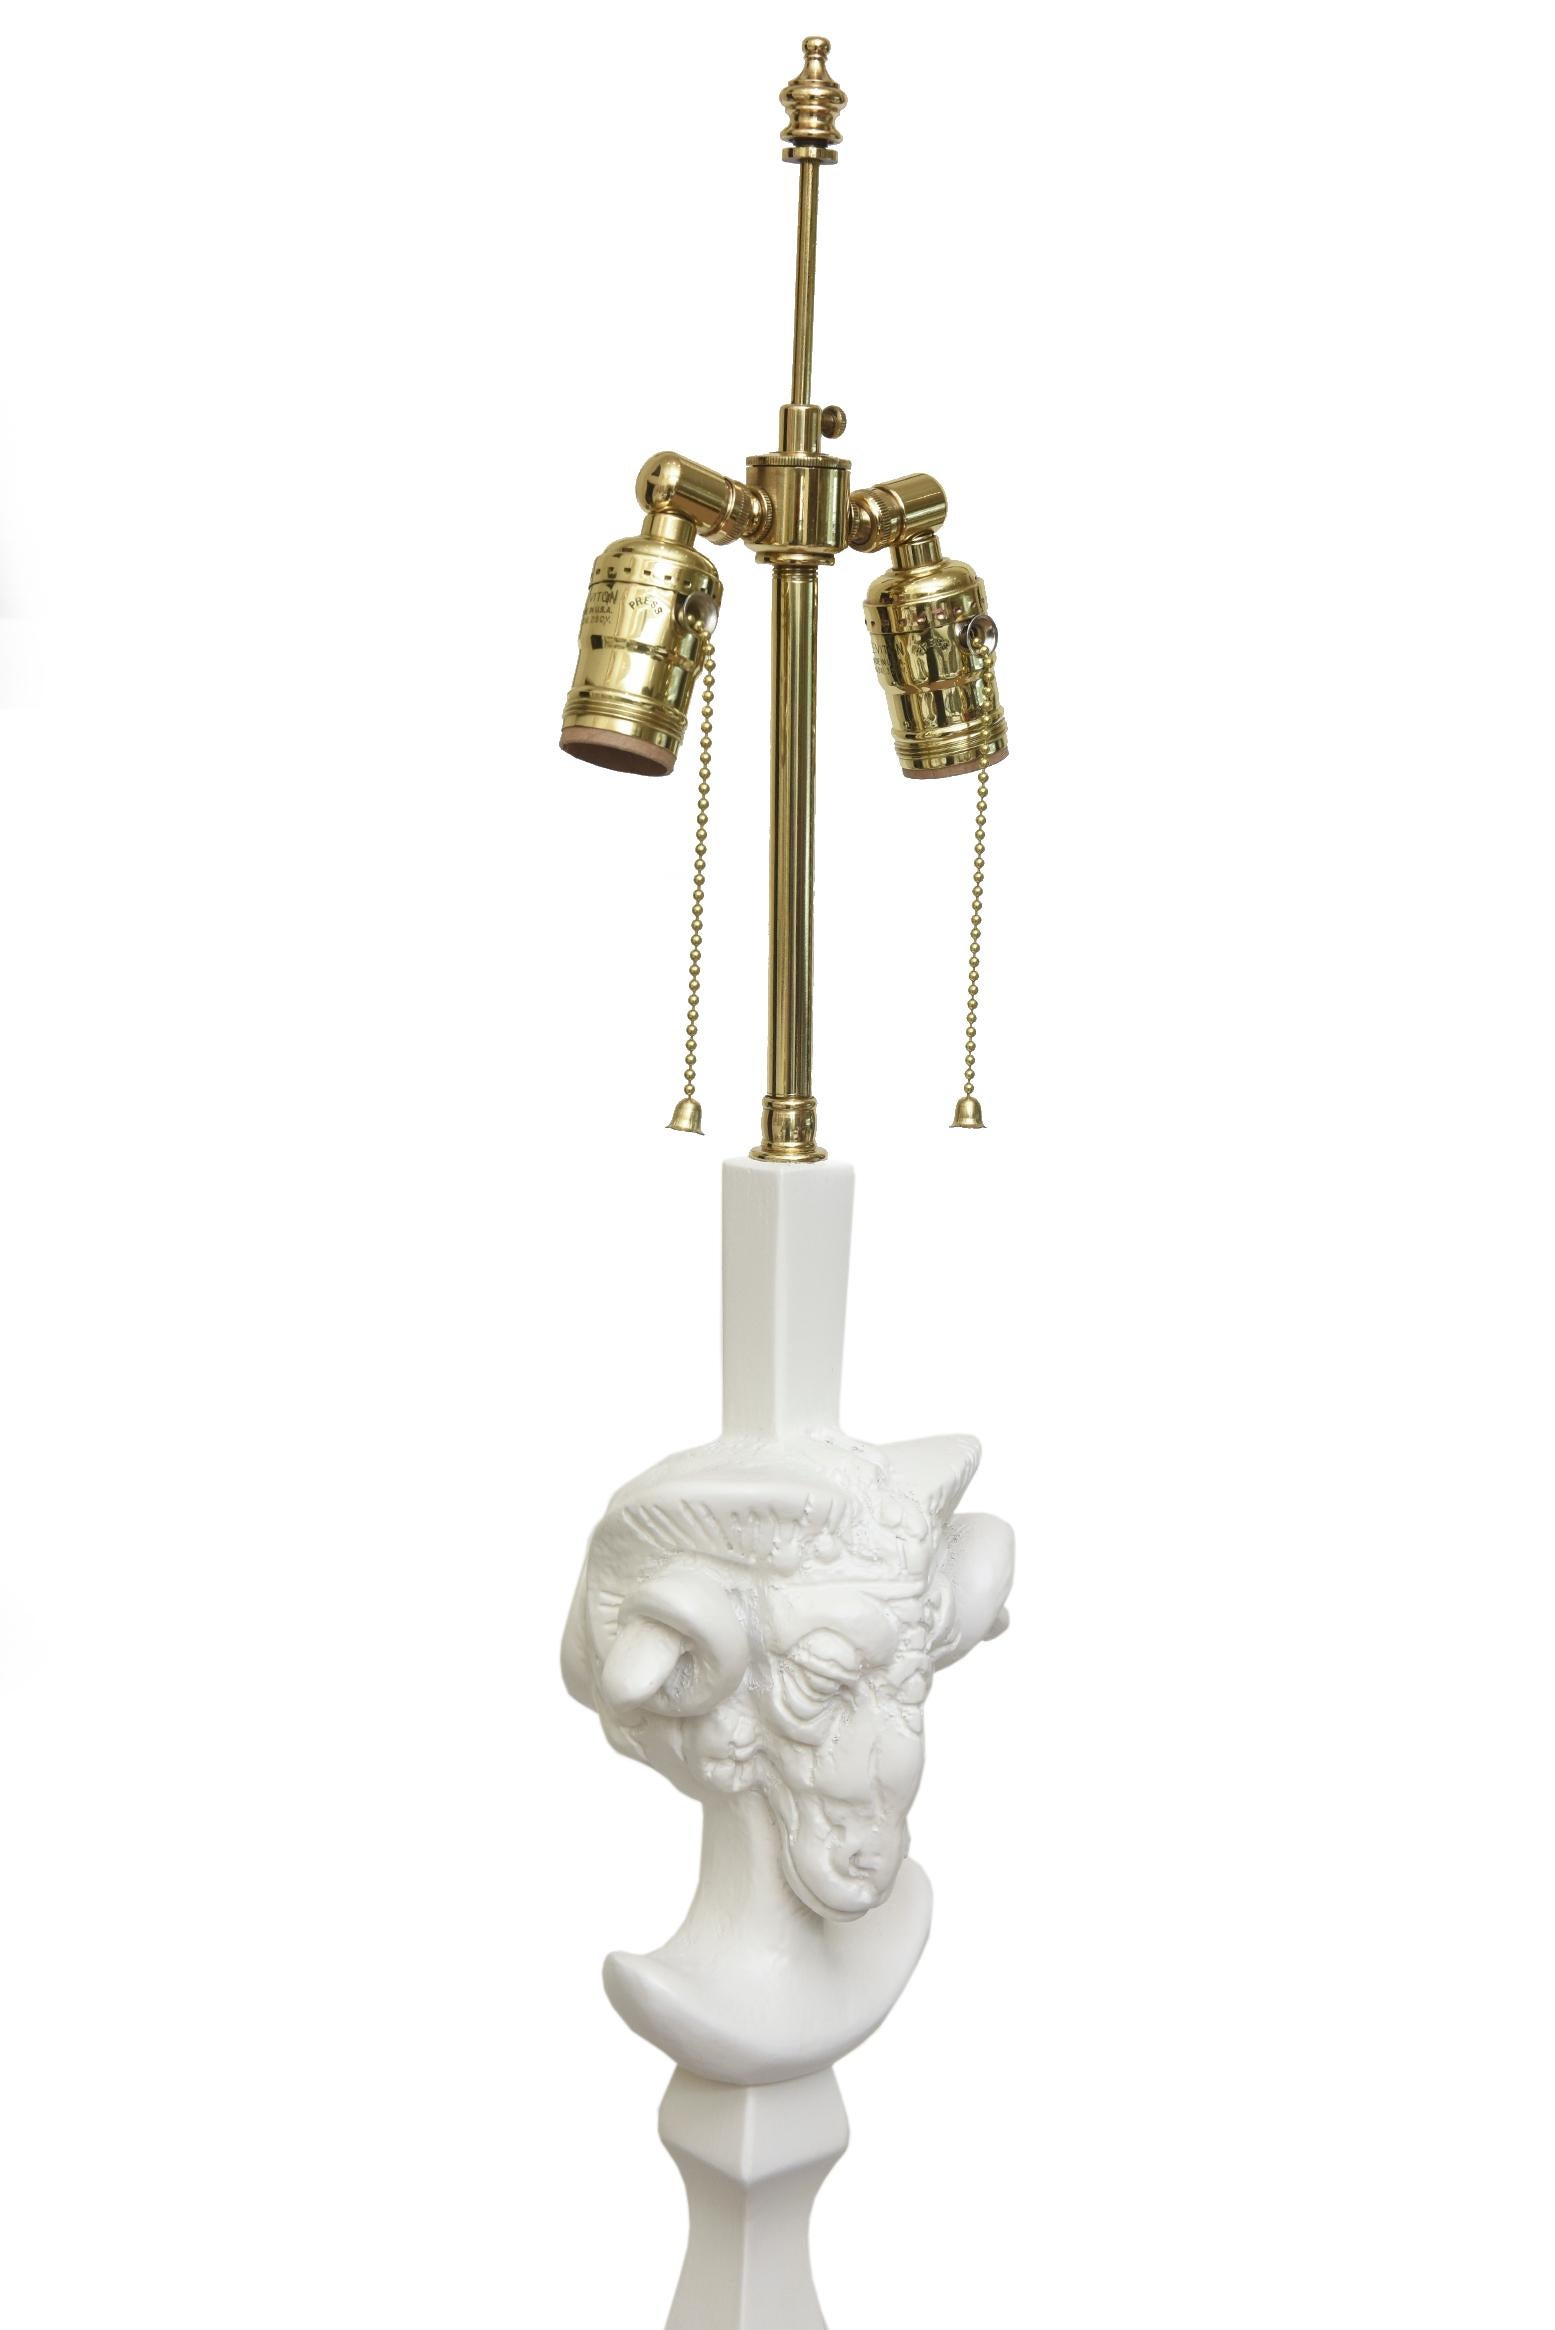 American Vintage Sirmos Wood Rams Head Floor Lamp with Tripod Feet and Brass Fittings For Sale